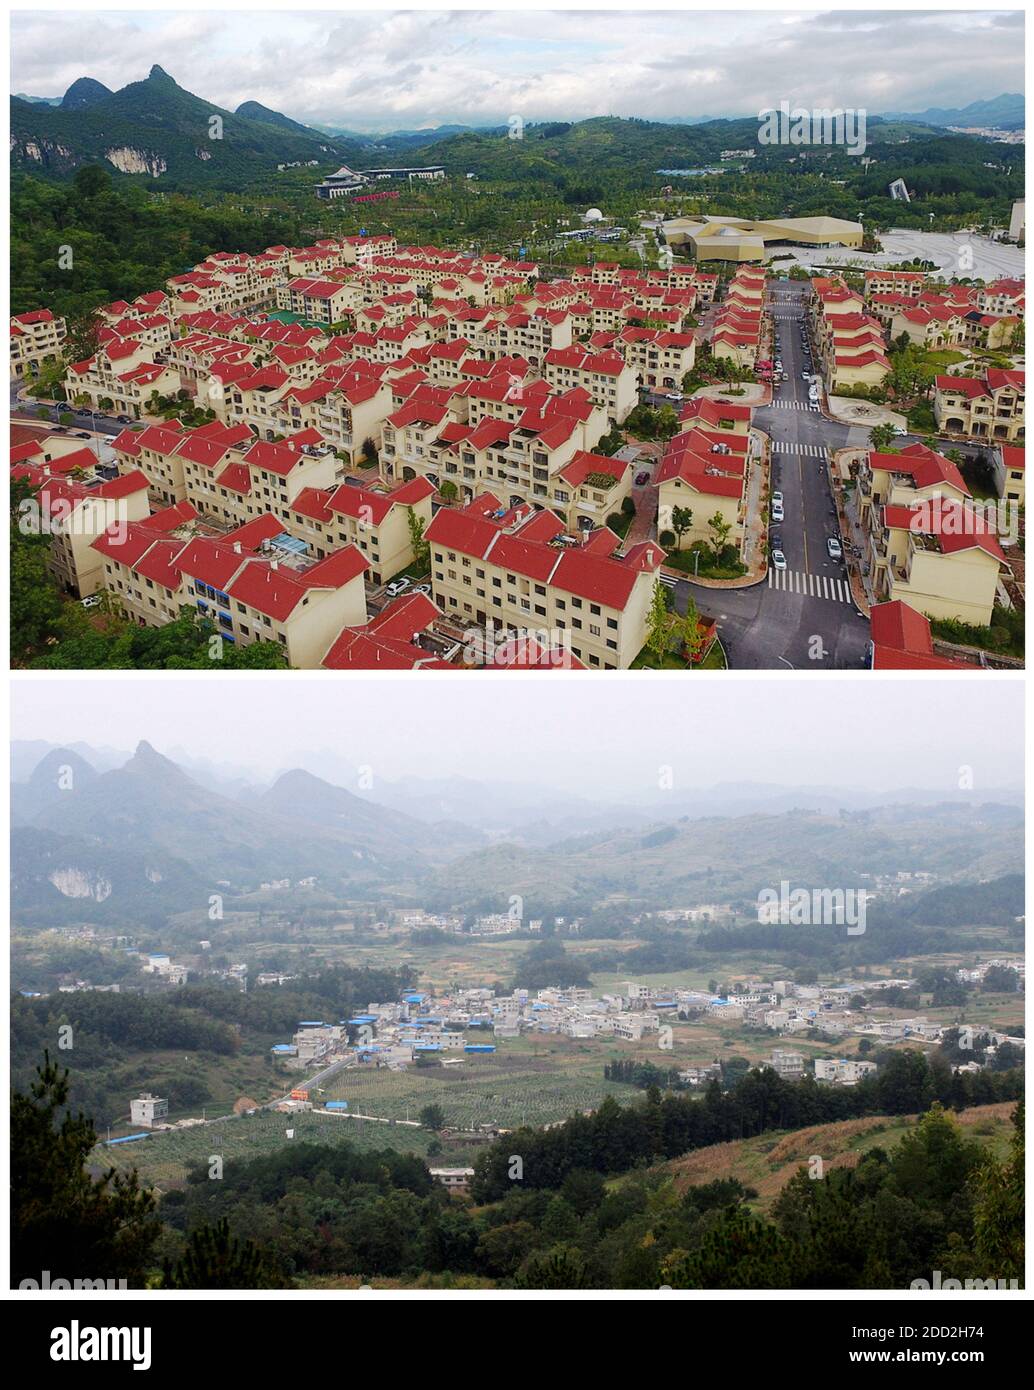 (201124) -- GUIYANG, Nov. 24, 2020 (Xinhua) -- In this combo photo, the upper part shows the aerial view of new look of Hanglong Village taken on July 24, 2019 and the lower file photo shows its previous look, in Pingtang County, southwest China's Guizhou Province. China has achieved the feat of removing all remaining counties from the country's poverty list. The last nine impoverished counties, all in southwest China's Guizhou Province, have eliminated absolute poverty, the provincial government announced on Monday. This means that all 832 registered poor counties in China have shaken off Stock Photo